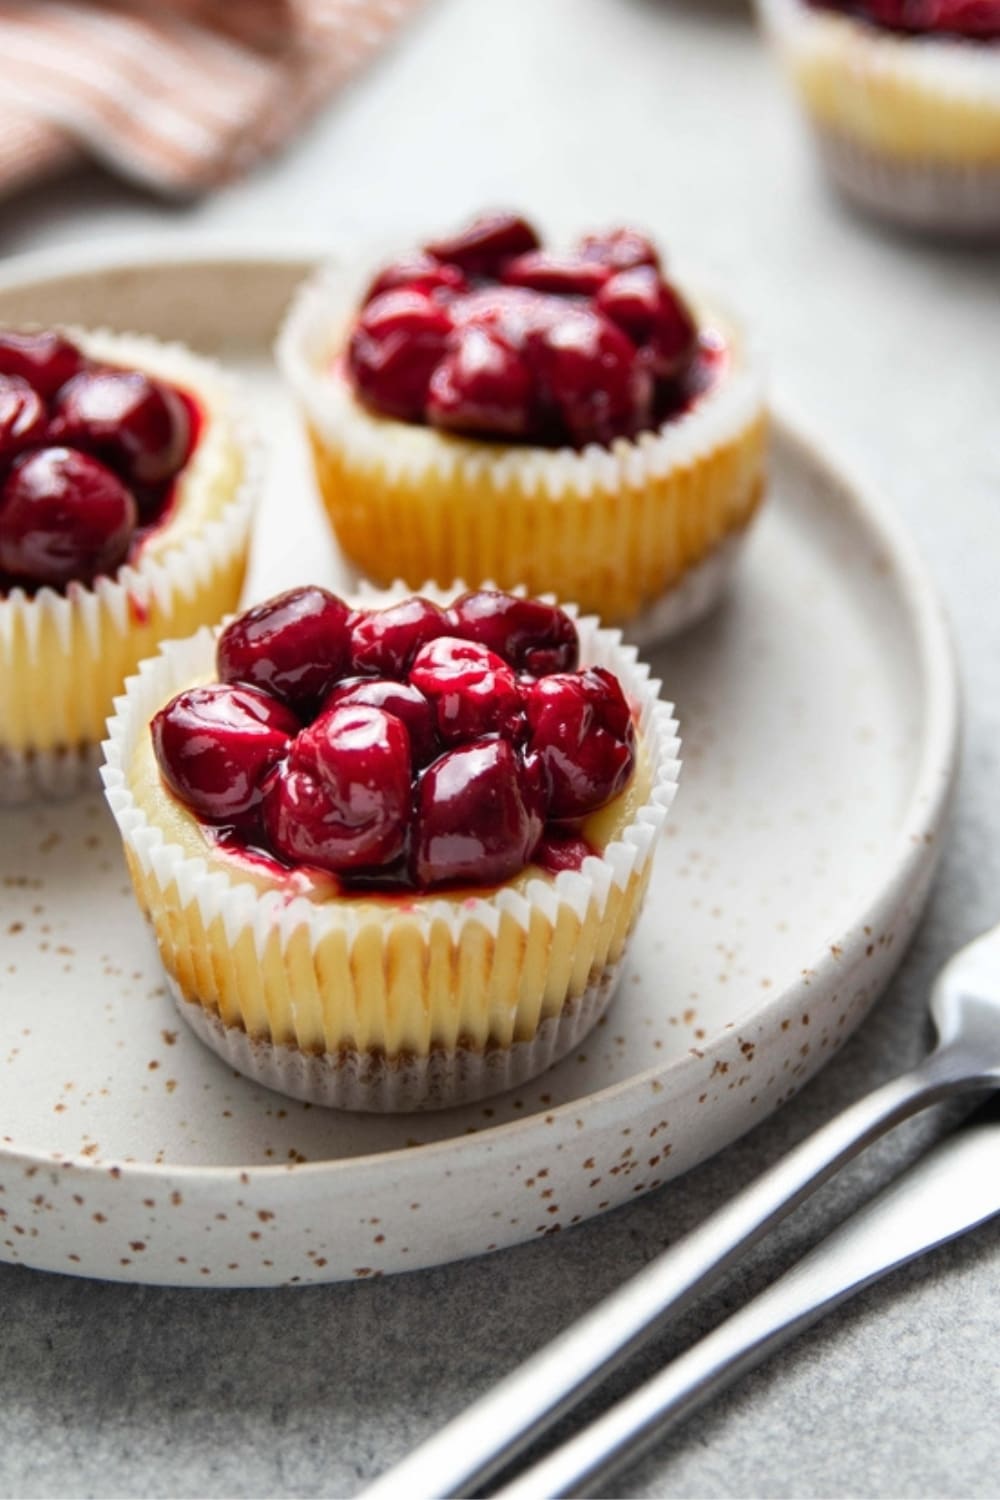 Easy Mini Cheesecakes (The Best Recipe!) featuring Mini Cheesecakes on a Plate with Cooked Cherry Topping